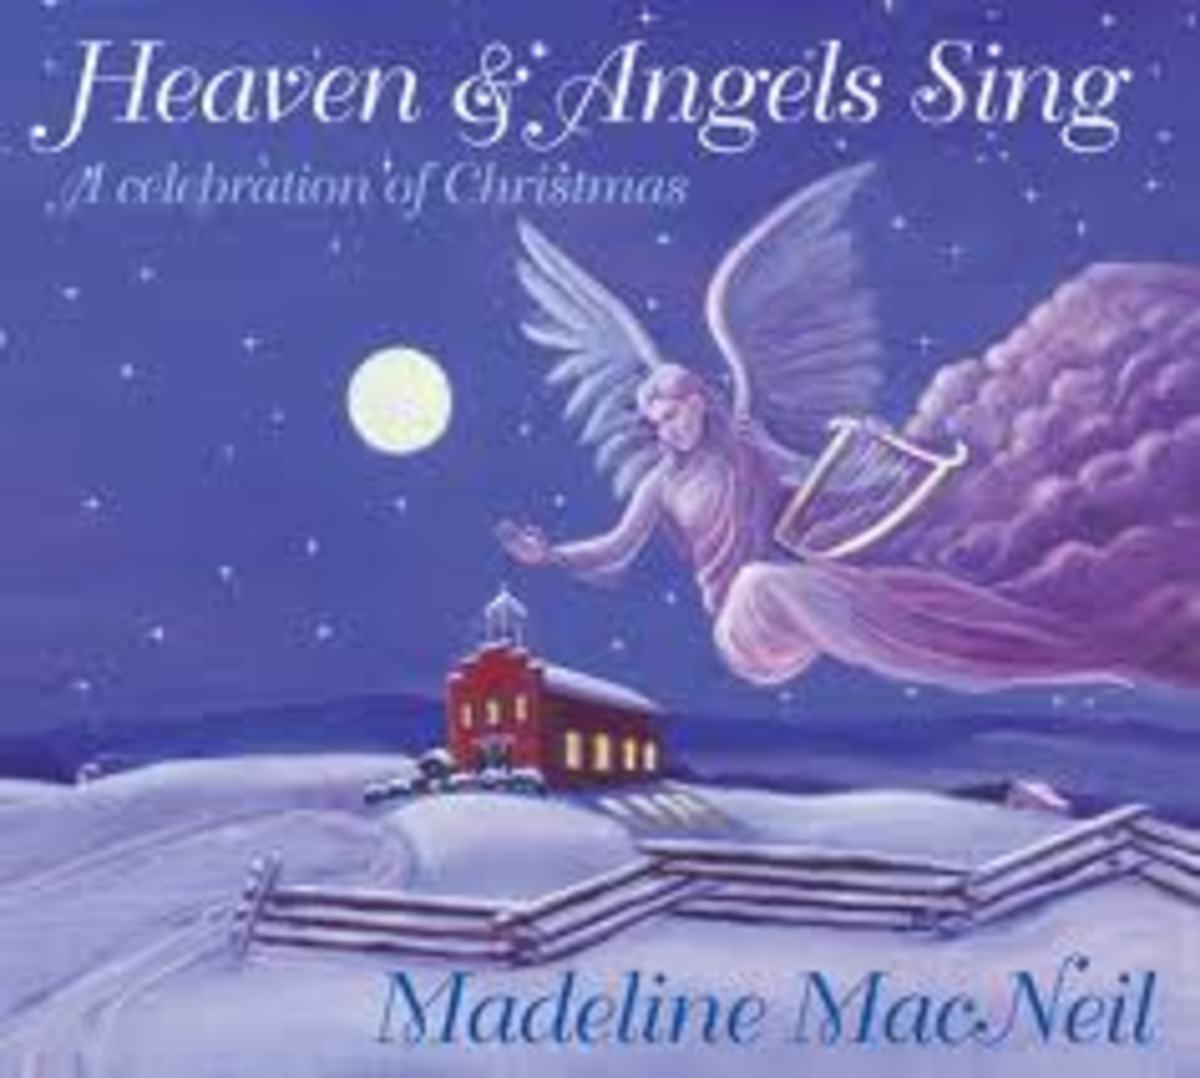 Happy spiritual events make people and angels sing to the Lord our God in many ways, so this is also the main activities that happen in heaven, people and angels sing together.  